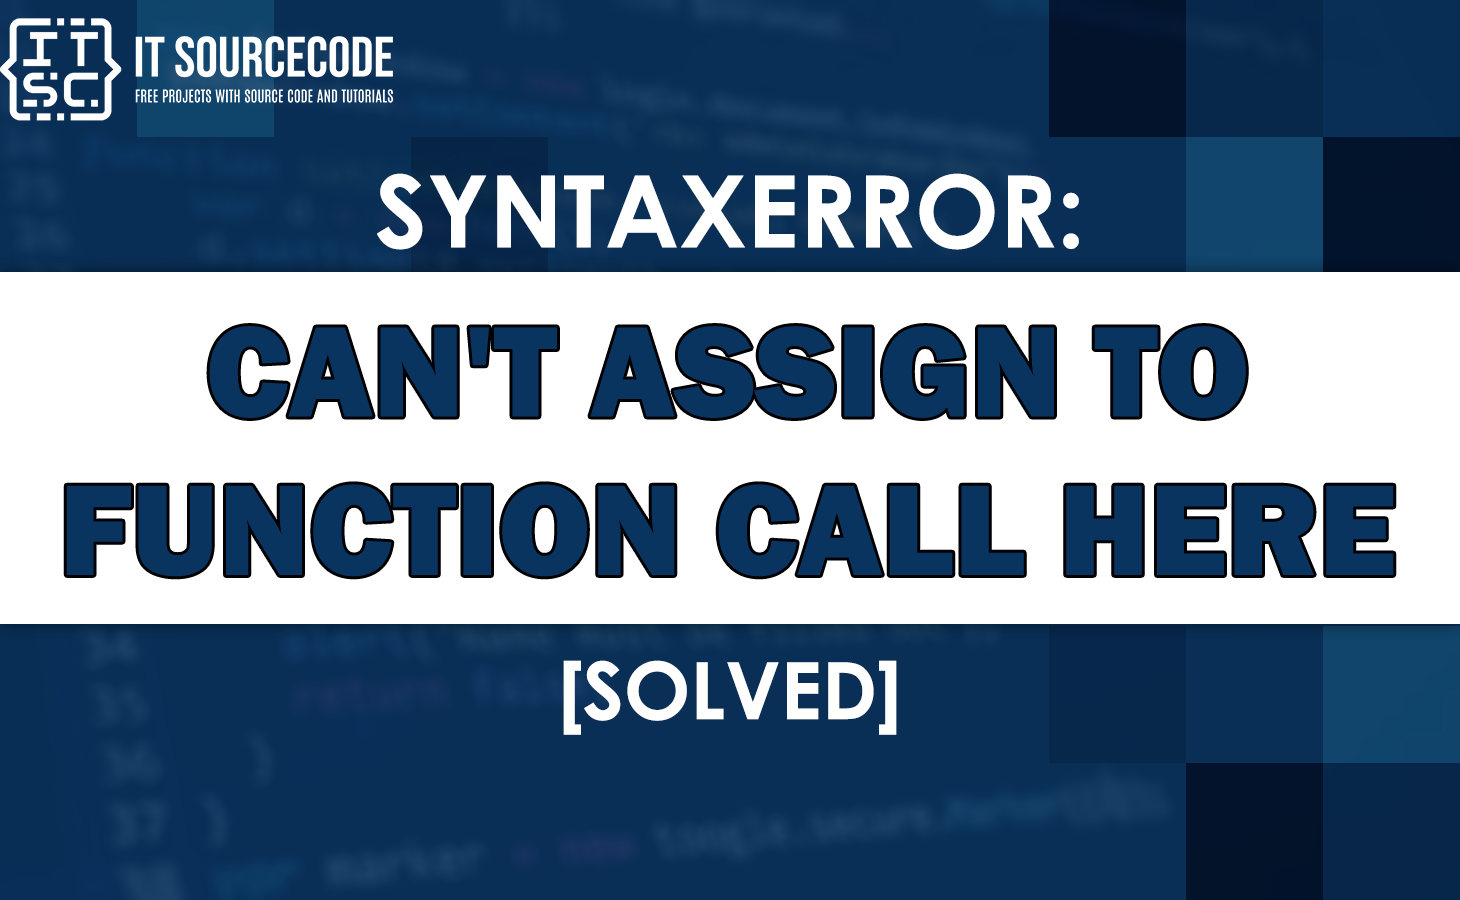 Syntaxerror can't assign to function call here